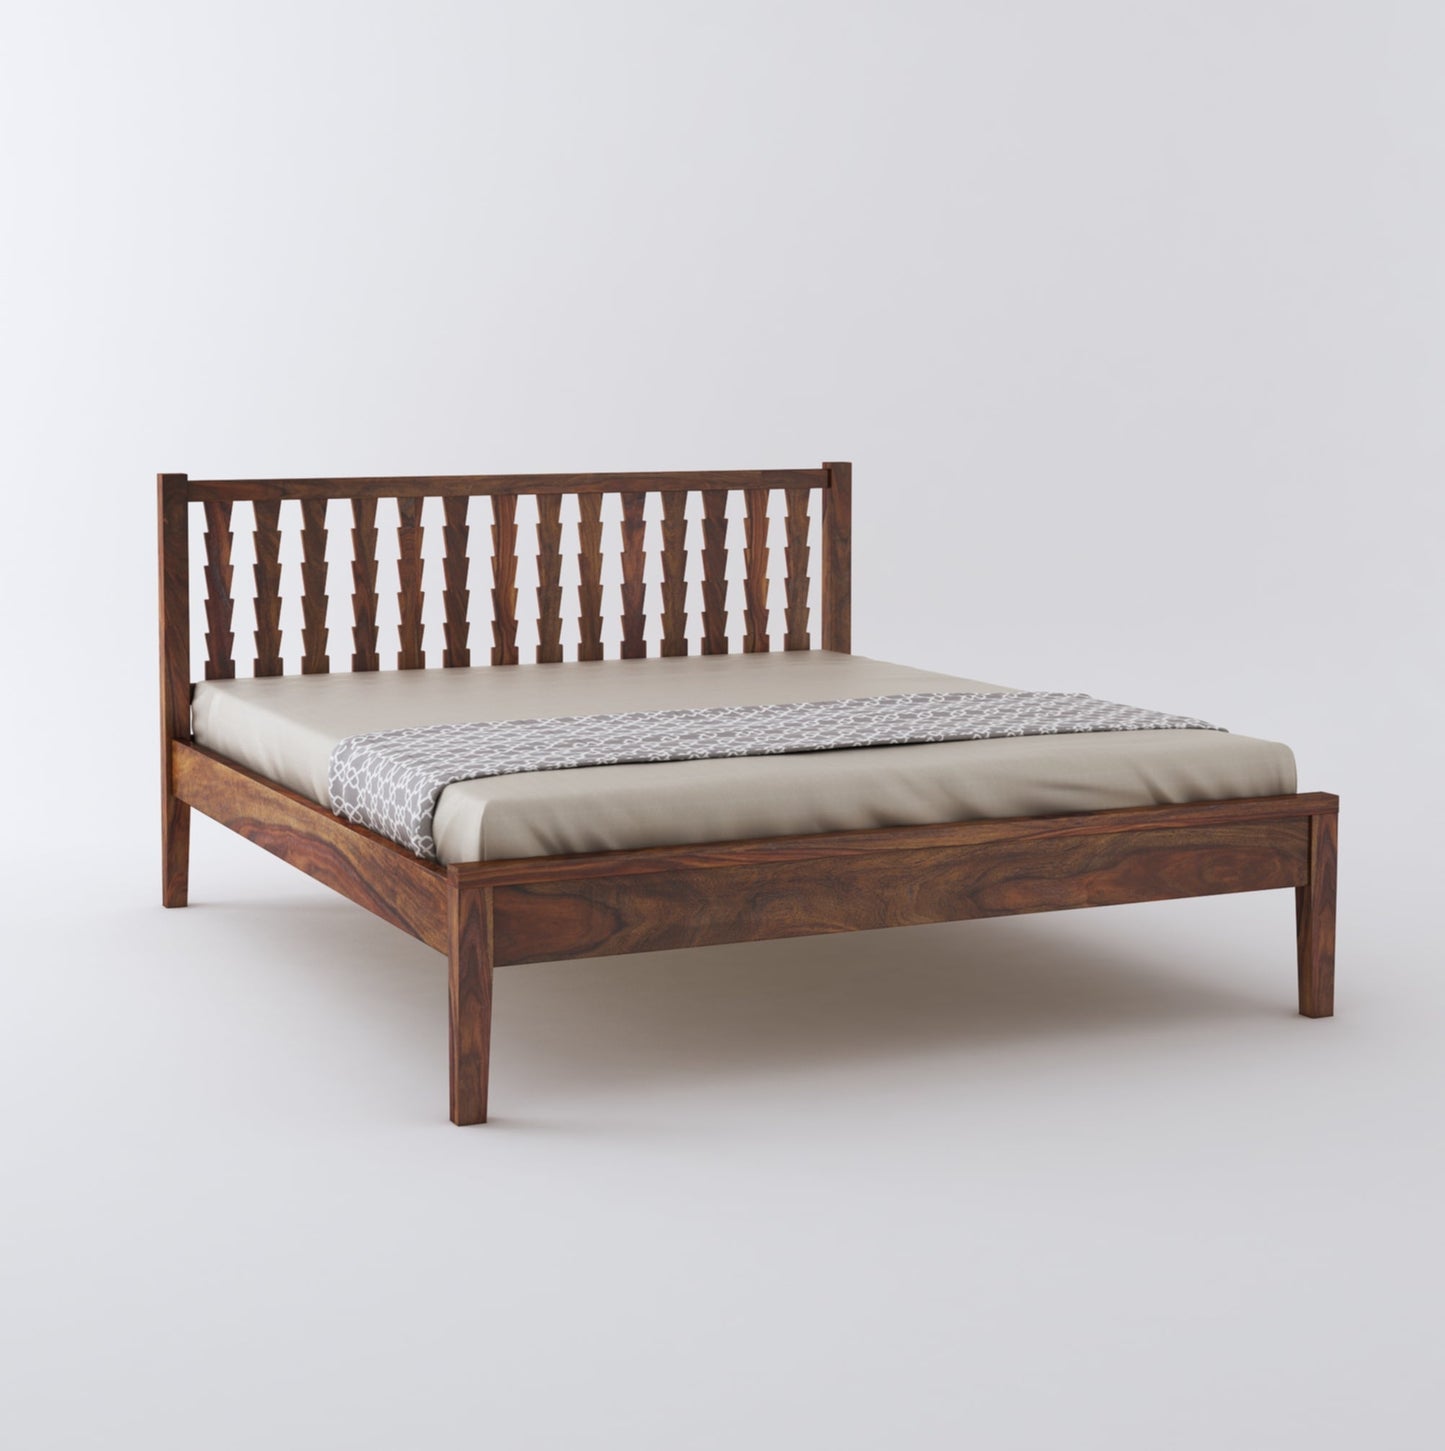 Home Edge Rico King Size Bed without Storage